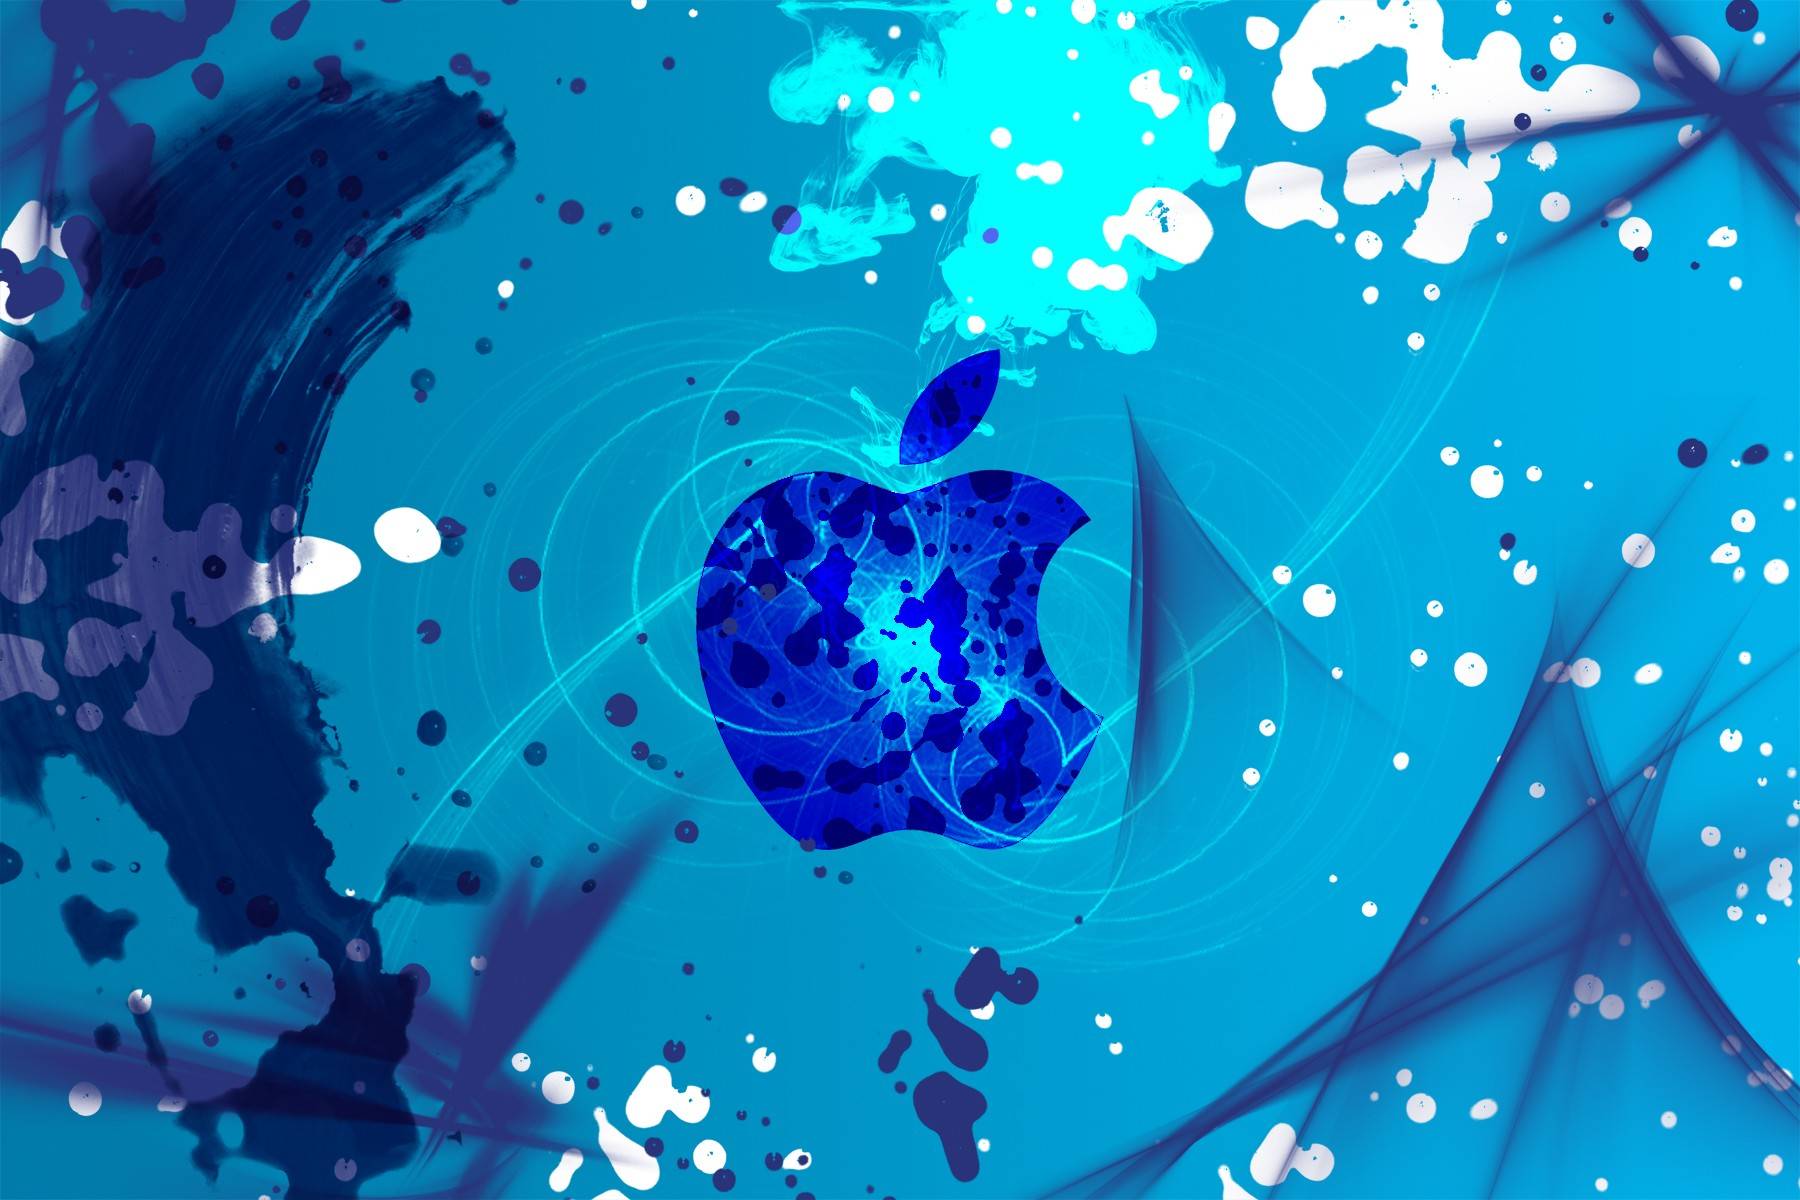 Abstract Apple Wallpaper